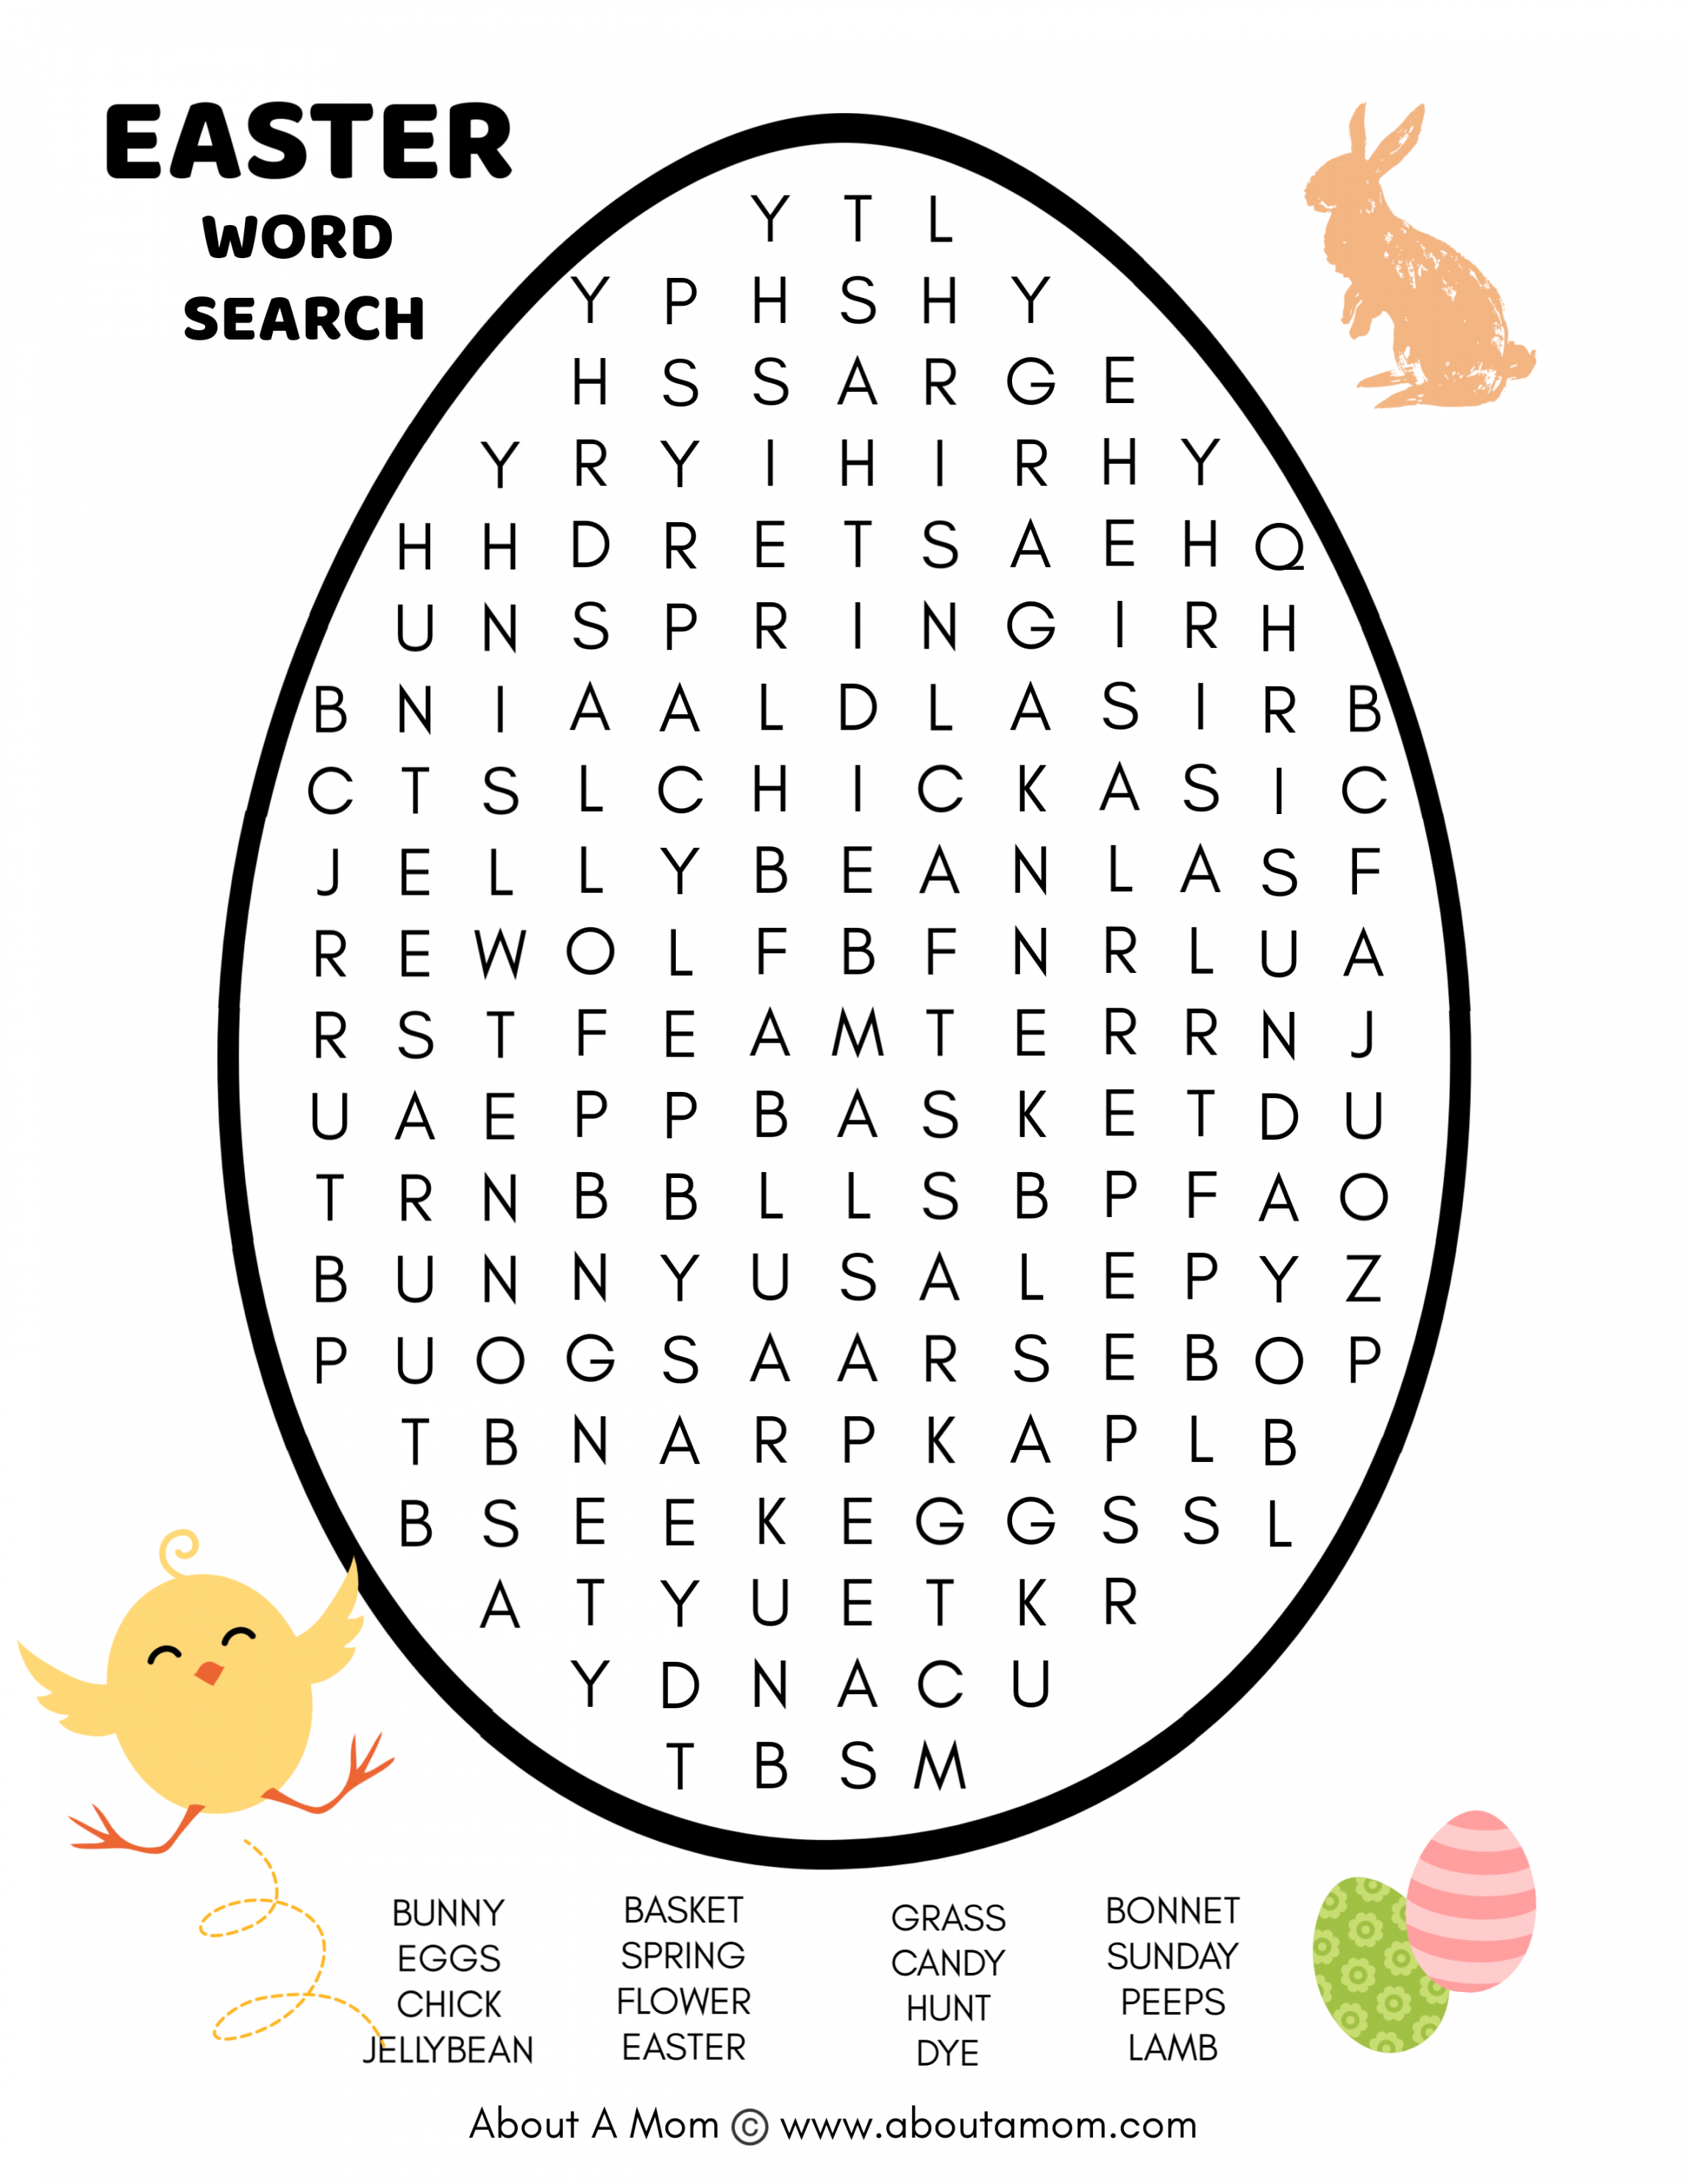 Free Easter Word Search Printable - About a Mom - FREE Printables - Free Printable Easter Word Search